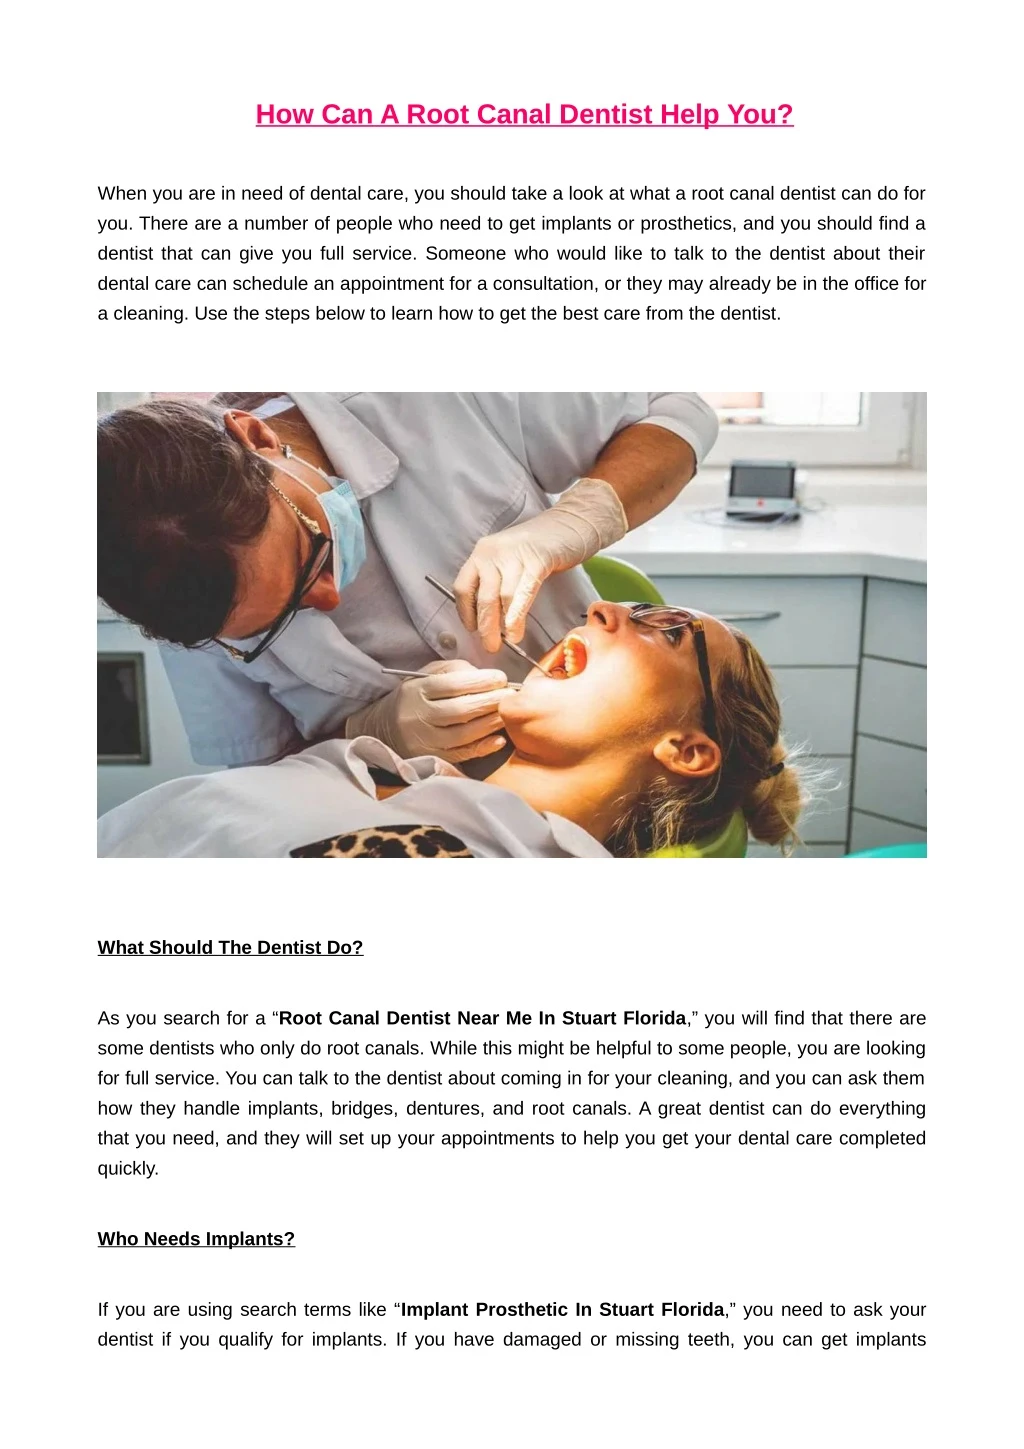 how can a root canal dentist help you